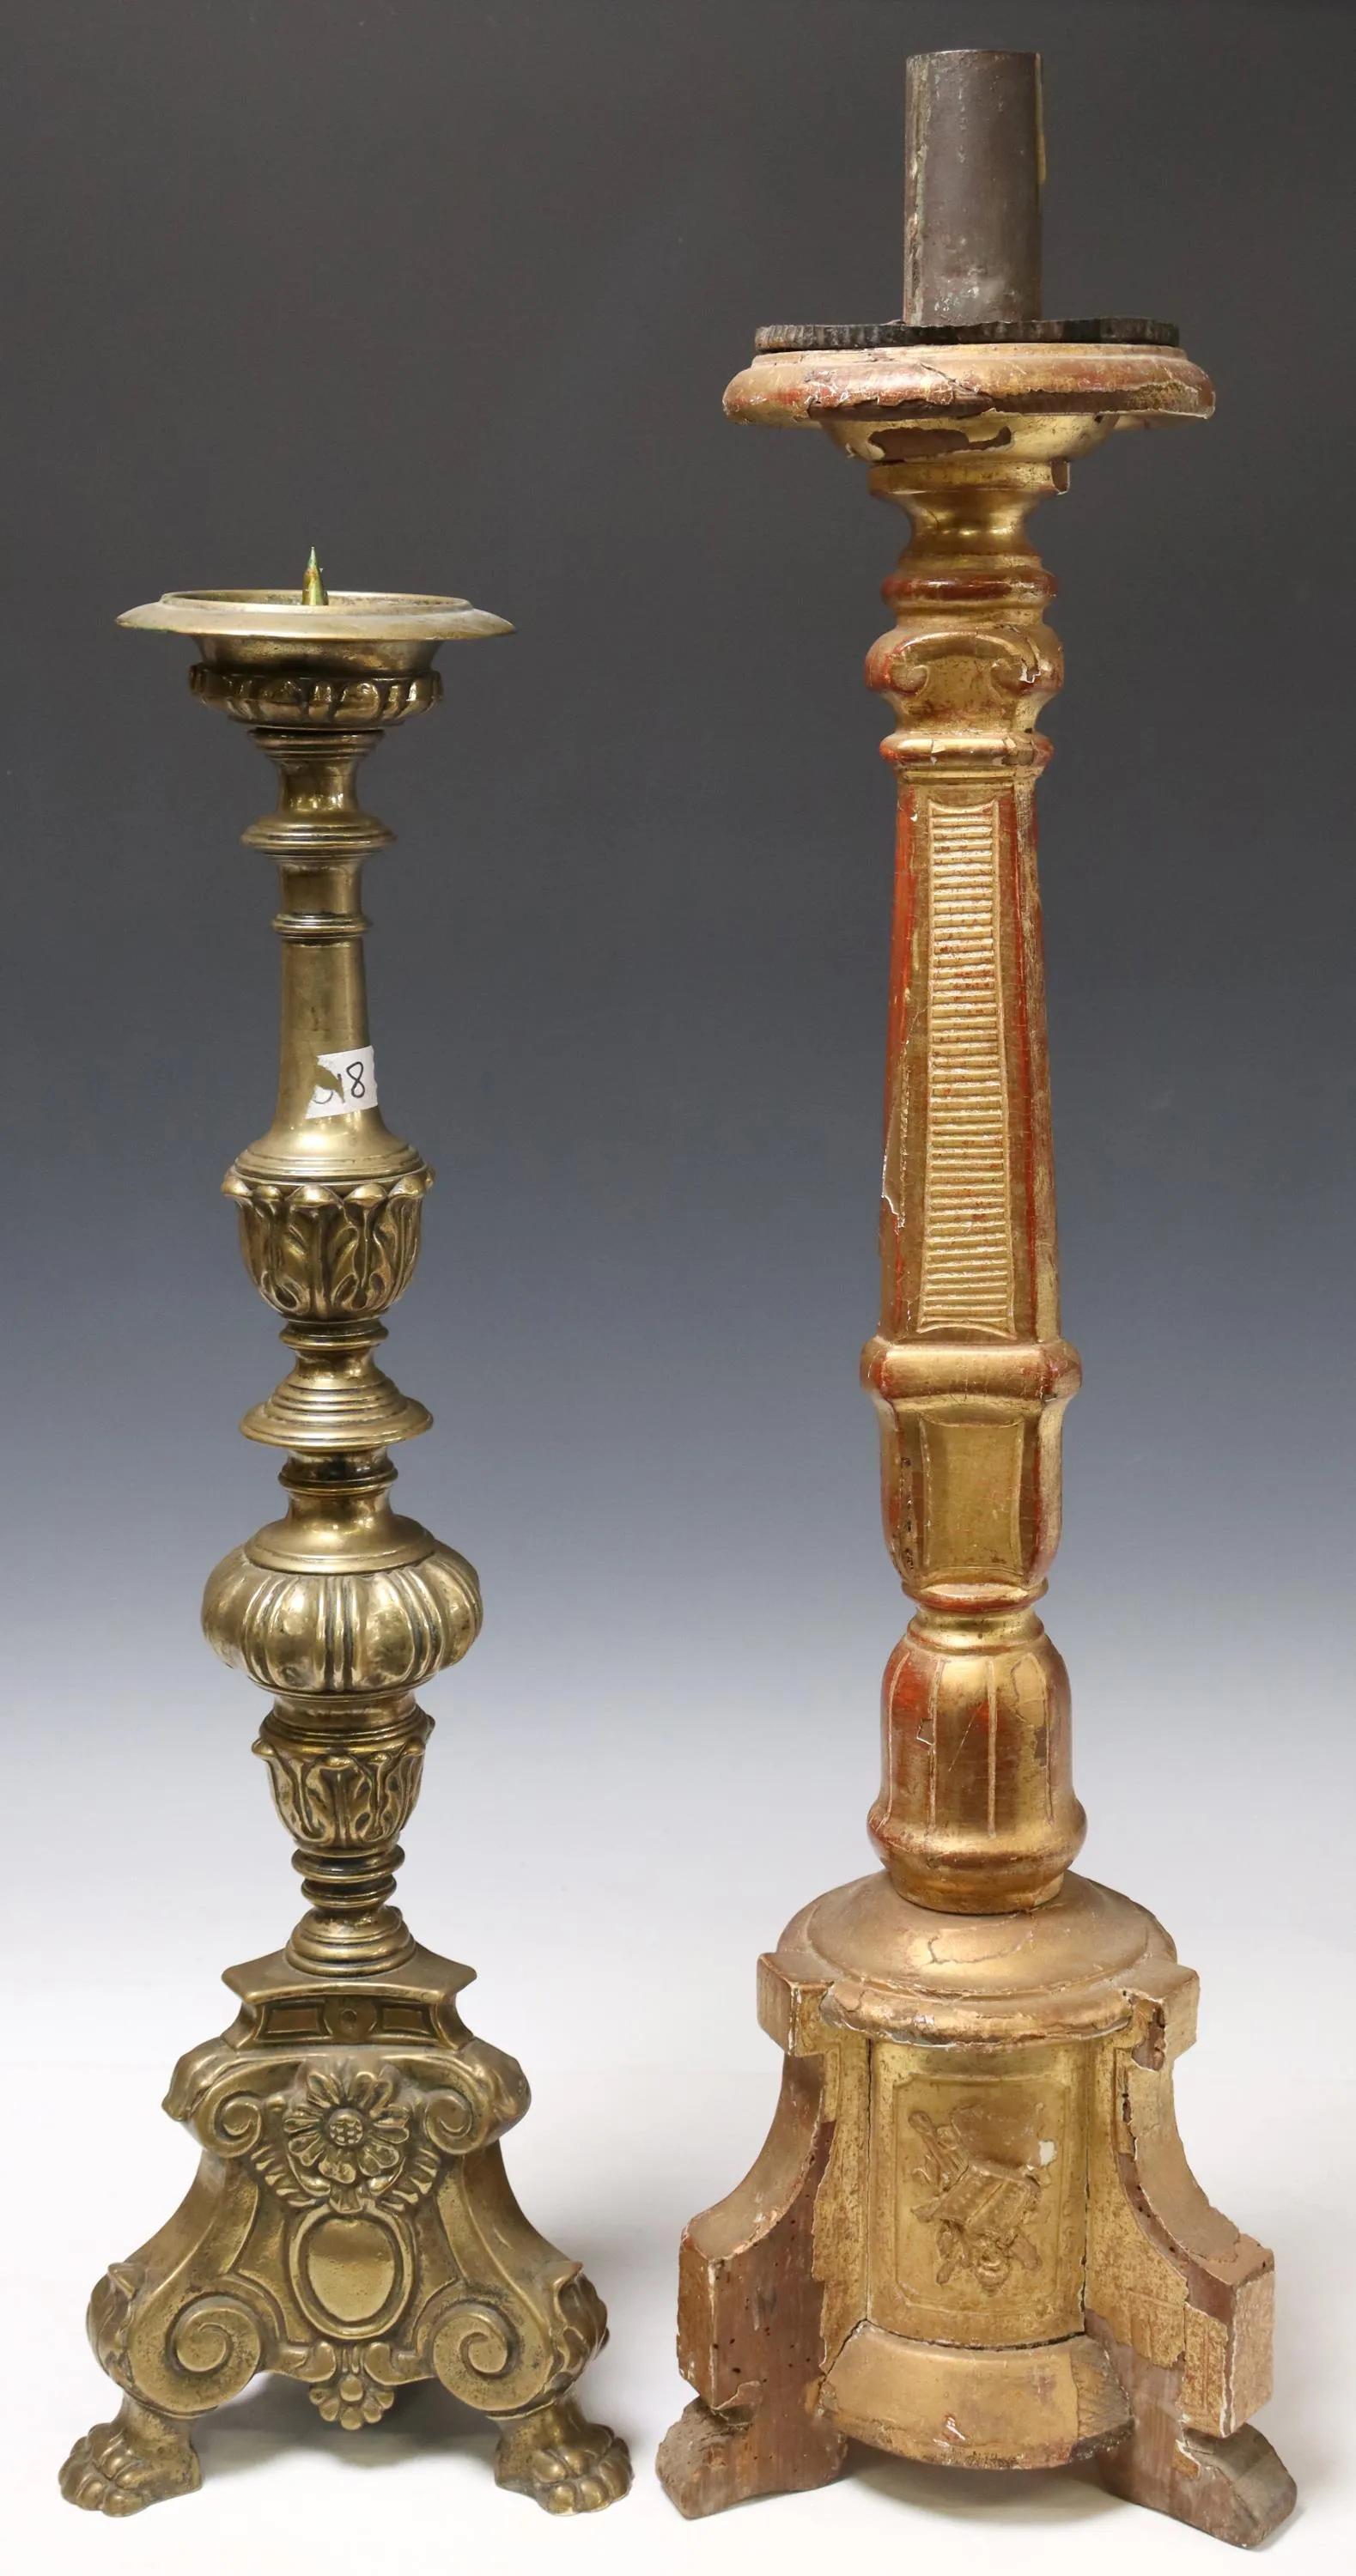 Two stunning antique Continental church altar candlesticks, late 19th c. 
Set includes;
1) Bronze candlestick, having turned form standard, rising on scrolled base, ending on paw feet. Cast bronze.
Dimensions
approx 24